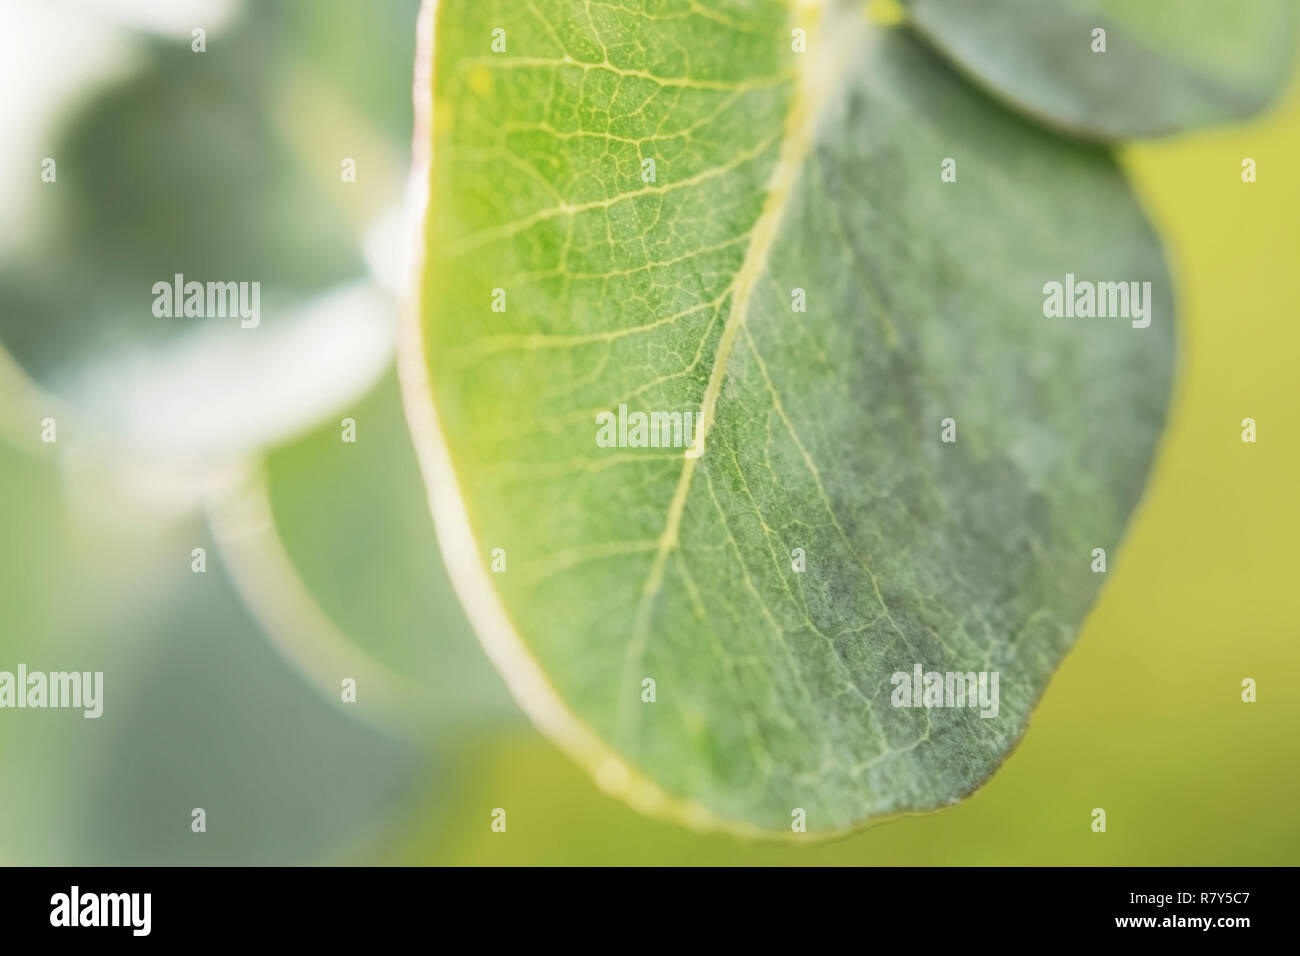 Eucalyptus leaves baby blue close up with streaks texture green macroshooting Stock Photo